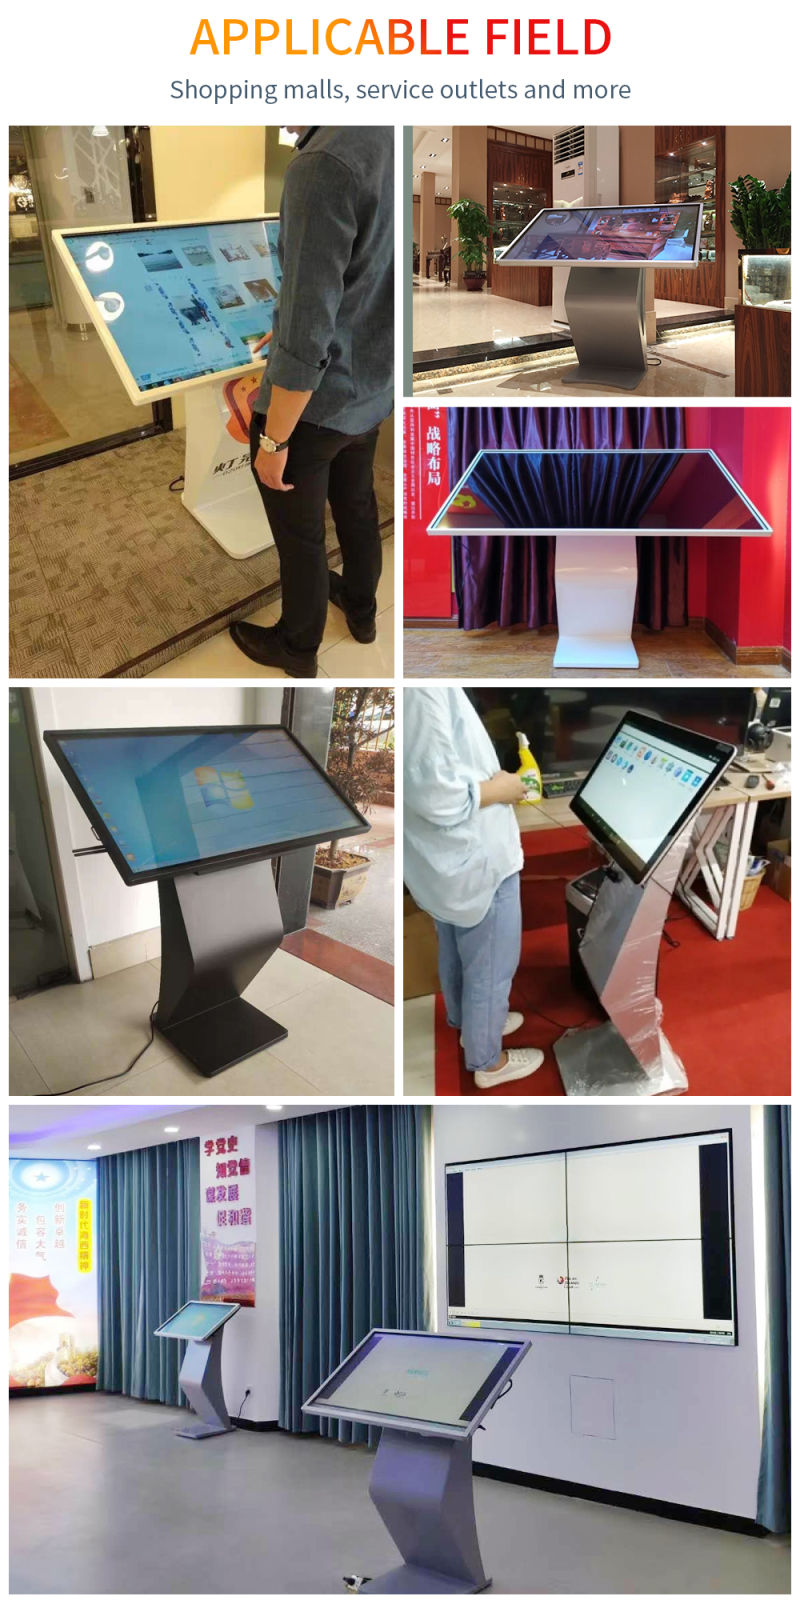 55 Inch Floor Stand Infrared Touch Screen Self-Service Terminal Information Checking Kiosk